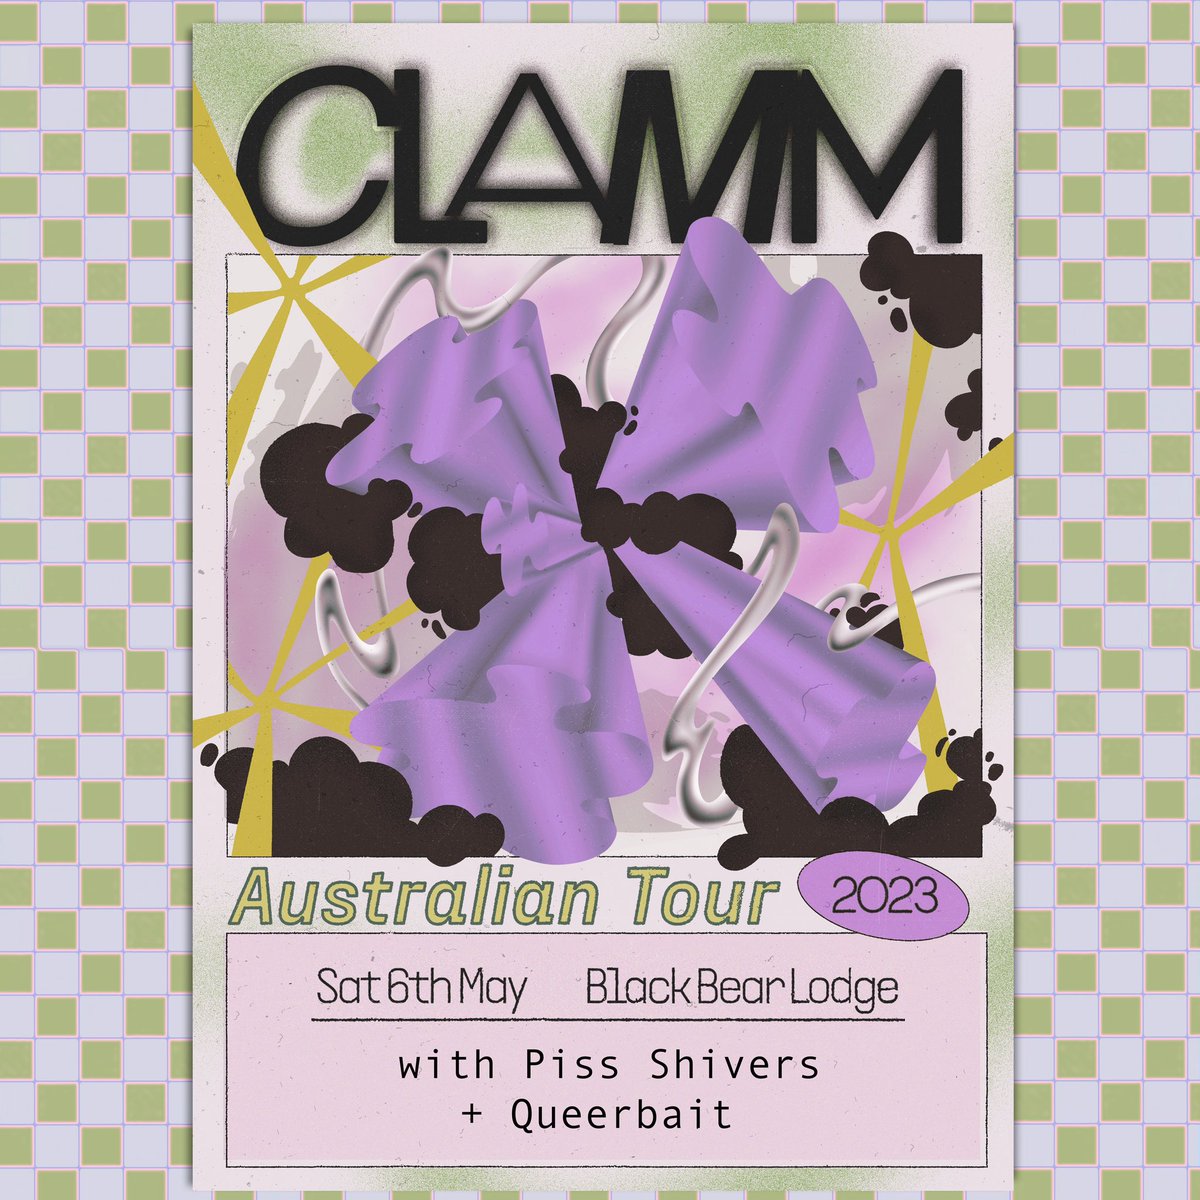 Supports announced for our April/May Australian tour. Tickets via linktr.ee/clamm